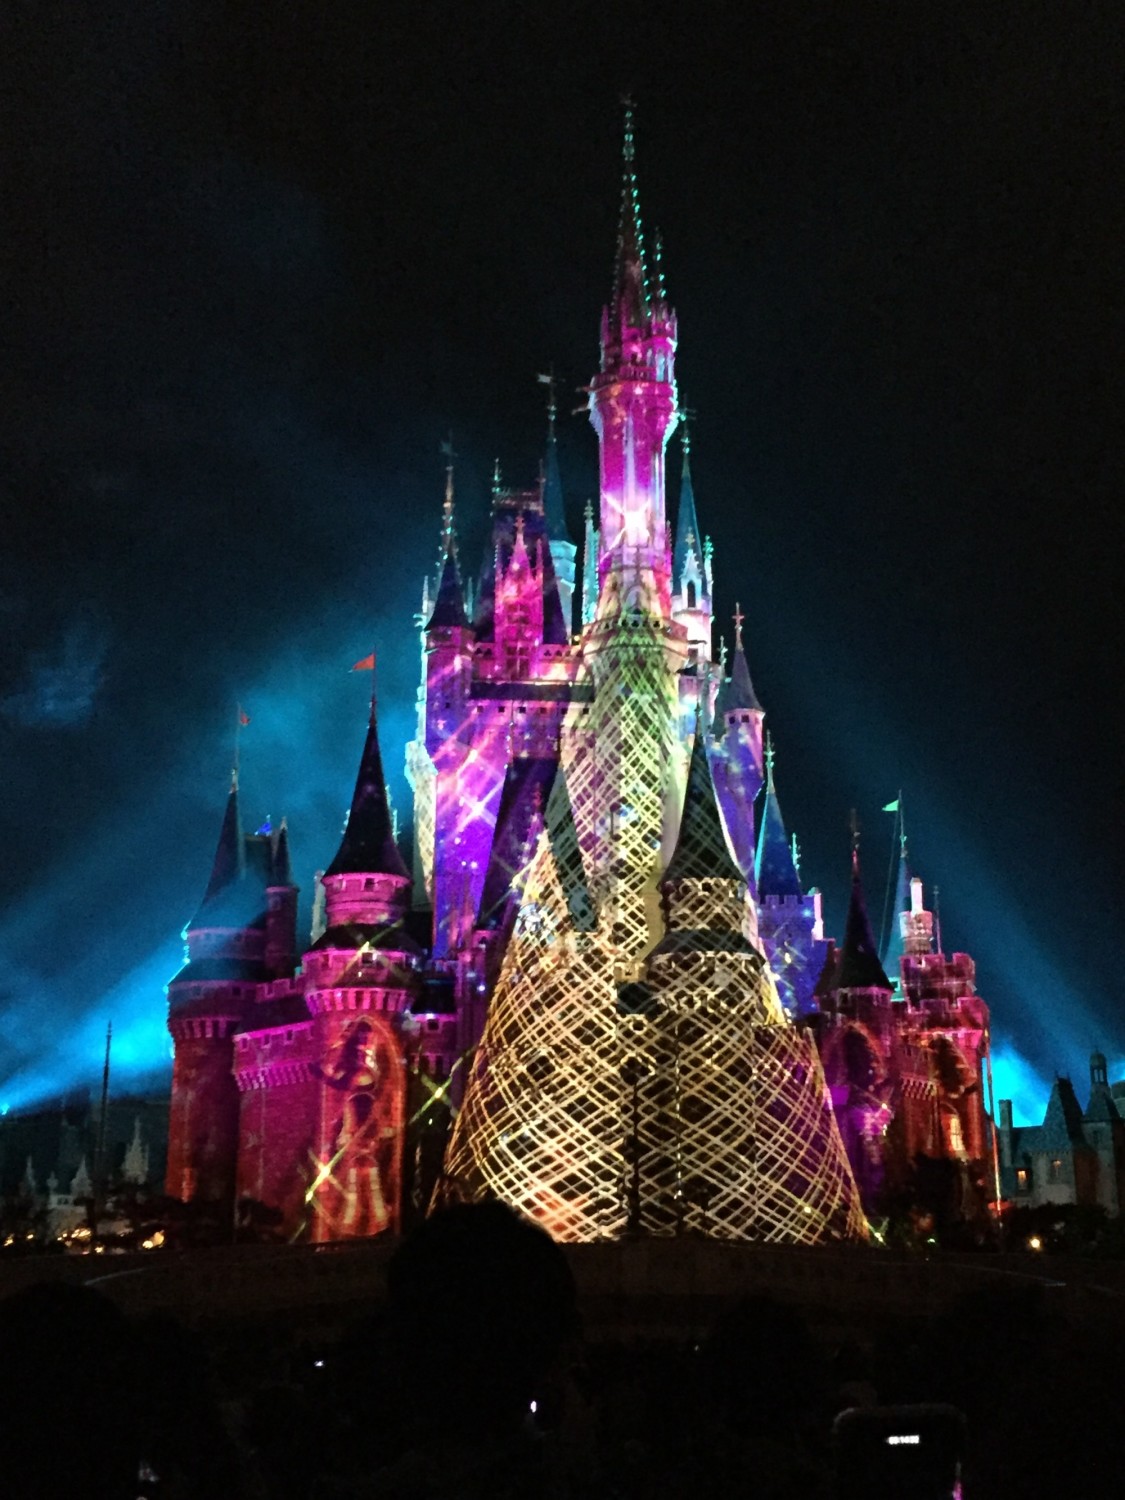 A decorated and lit-up castle at nighttime